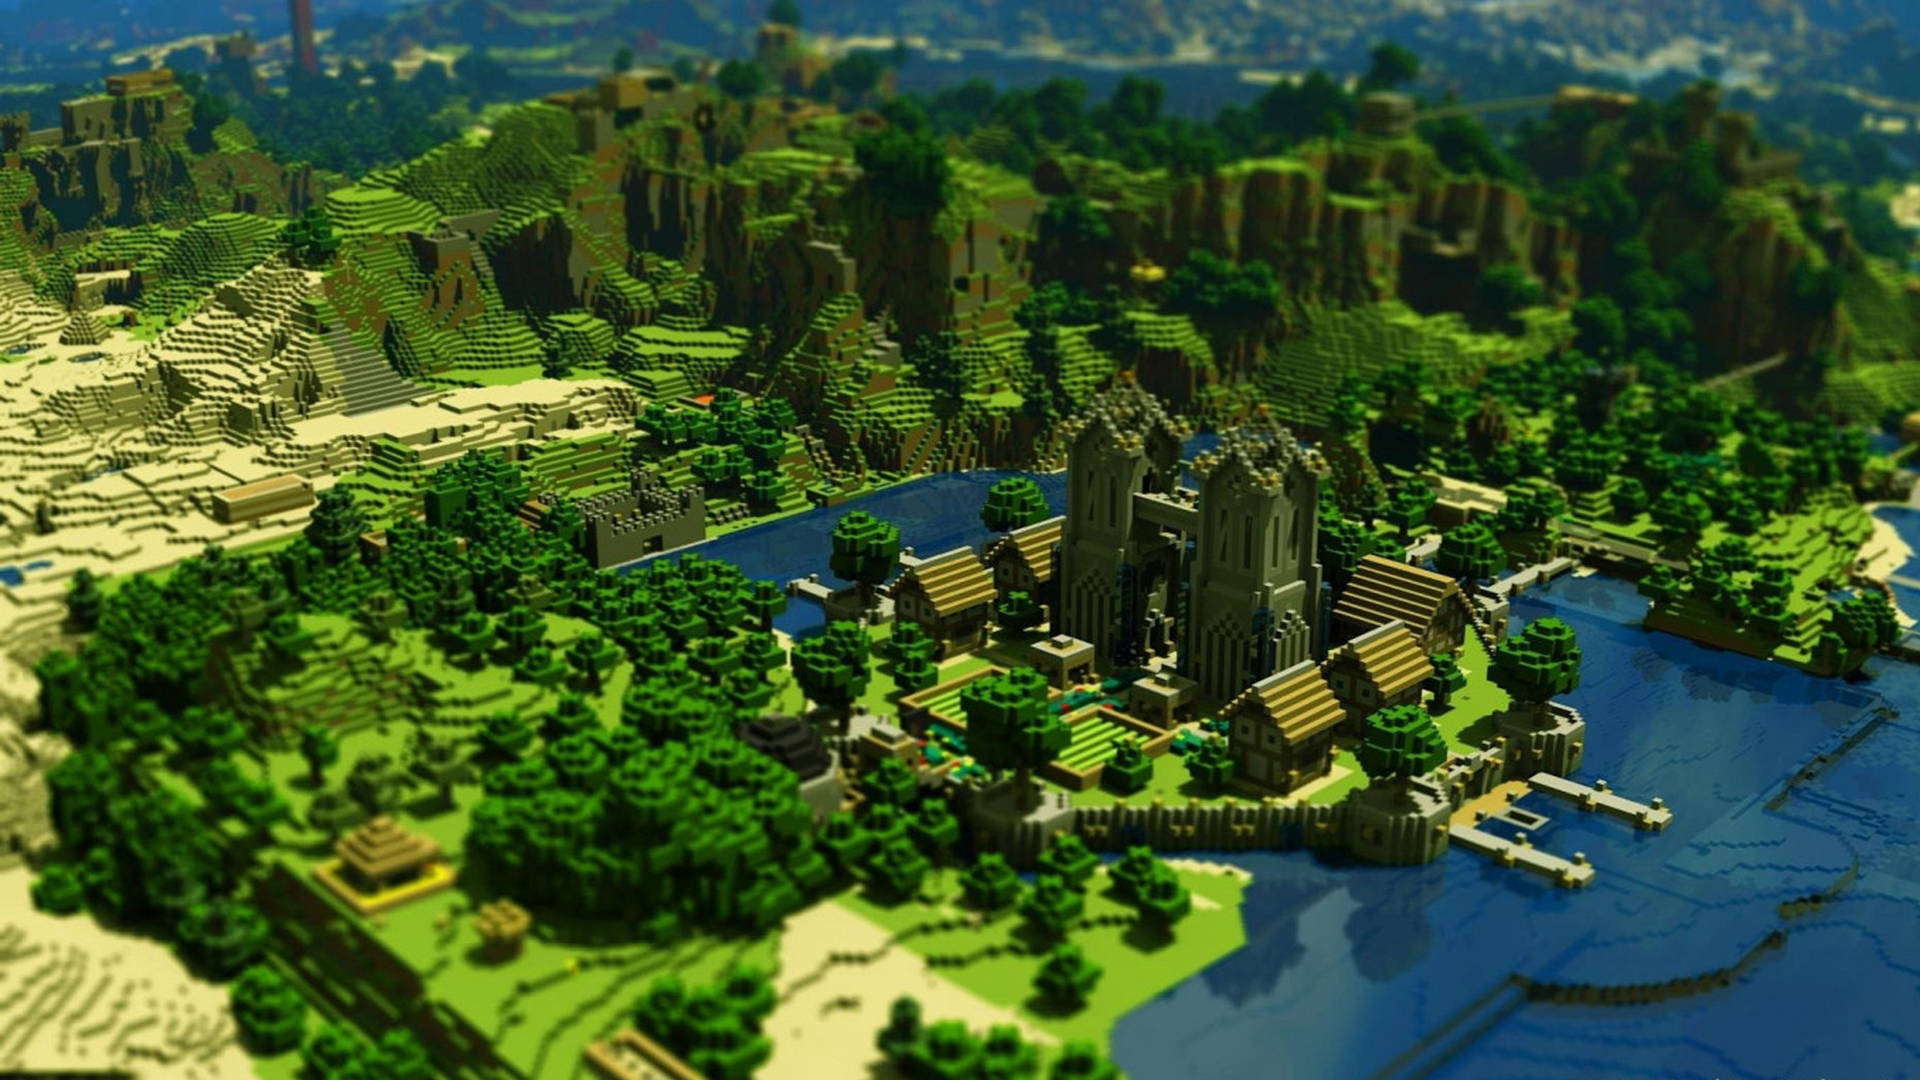 Town Surrounded By Woods 2560x1440 Minecraft Wallpaper